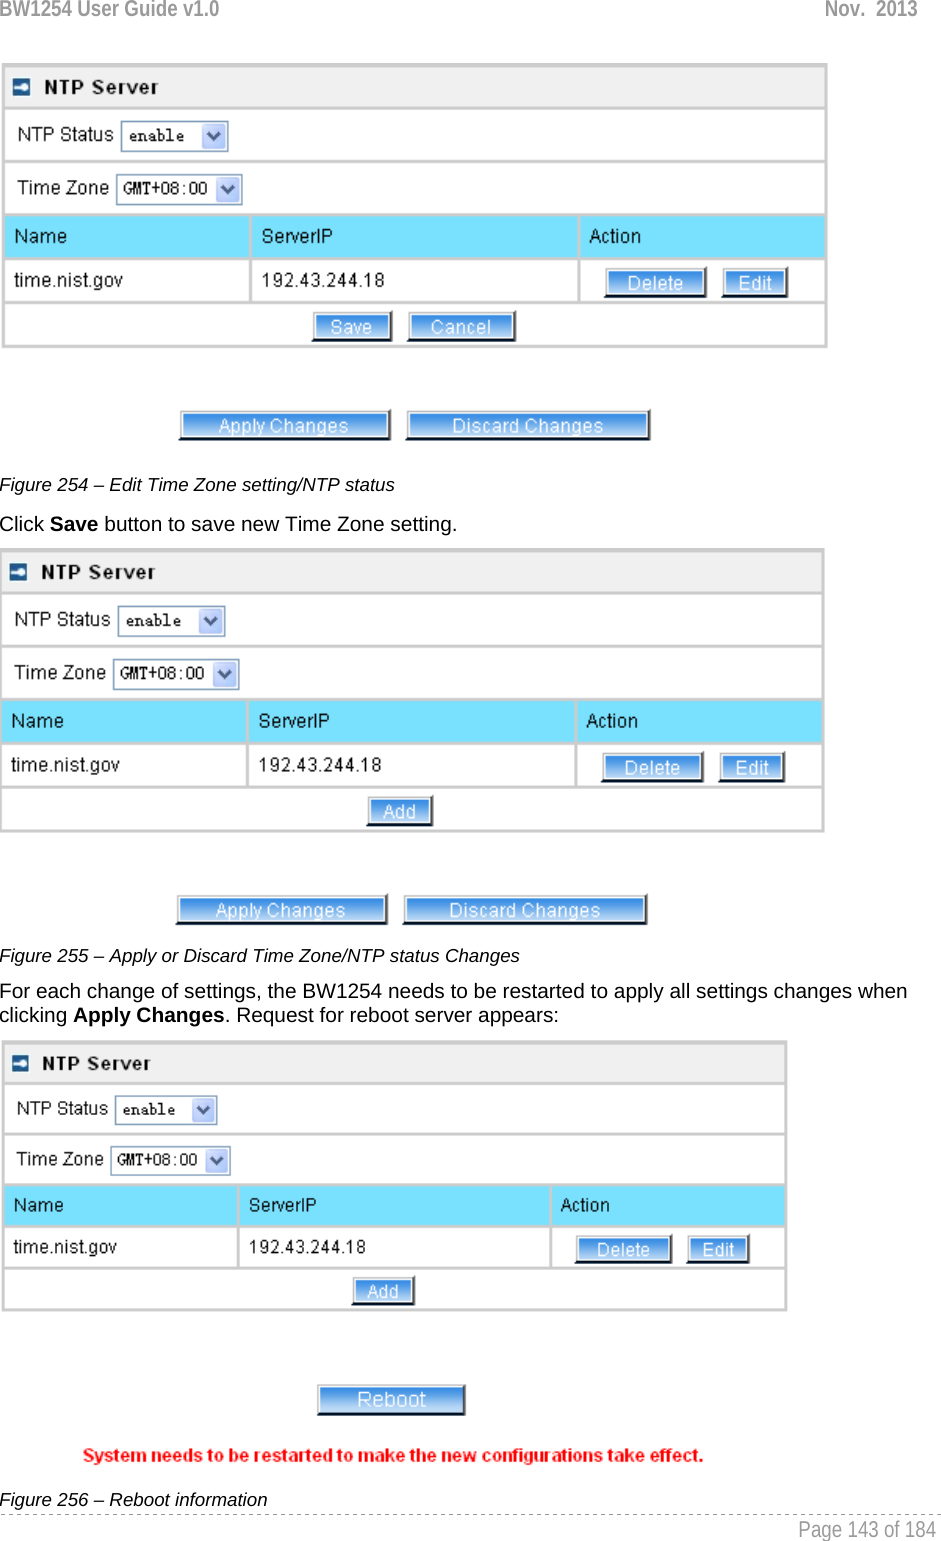 BW1254 User Guide v1.0  Nov.  2013     Page 143 of 184    Figure 254 – Edit Time Zone setting/NTP status Click Save button to save new Time Zone setting.  Figure 255 – Apply or Discard Time Zone/NTP status Changes For each change of settings, the BW1254 needs to be restarted to apply all settings changes when clicking Apply Changes. Request for reboot server appears:  Figure 256 – Reboot information 